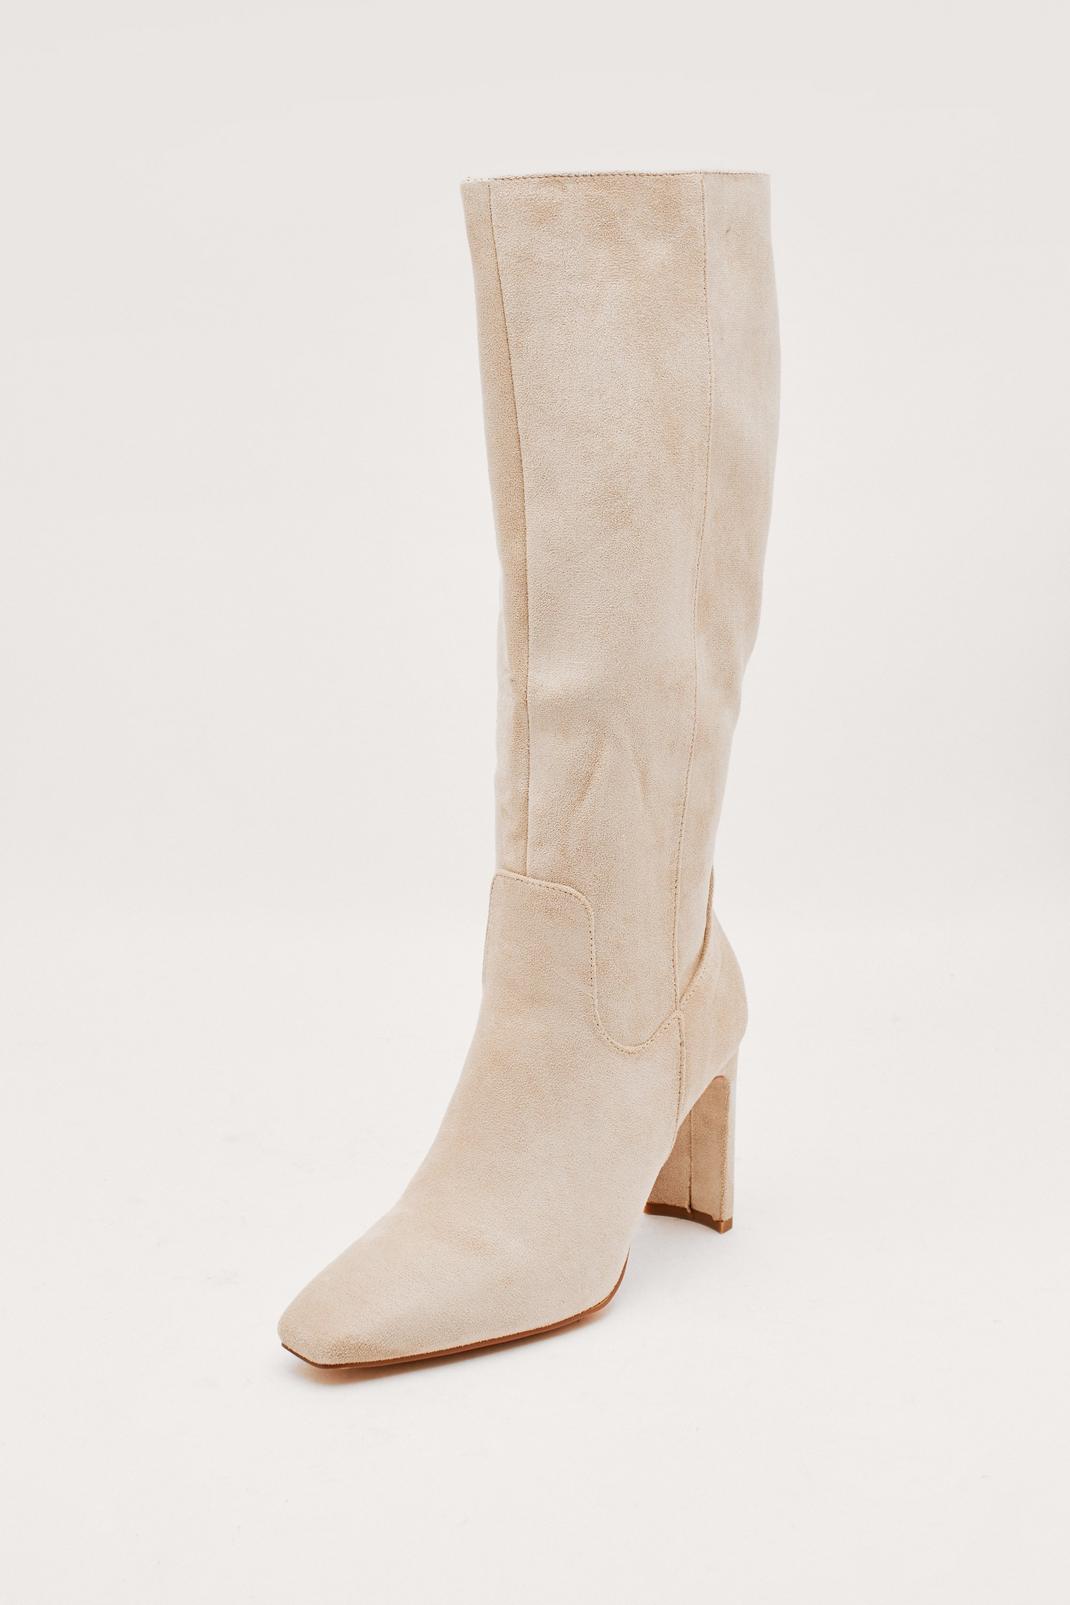 Beige Faux Suede Heeled Calf Boots image number 1